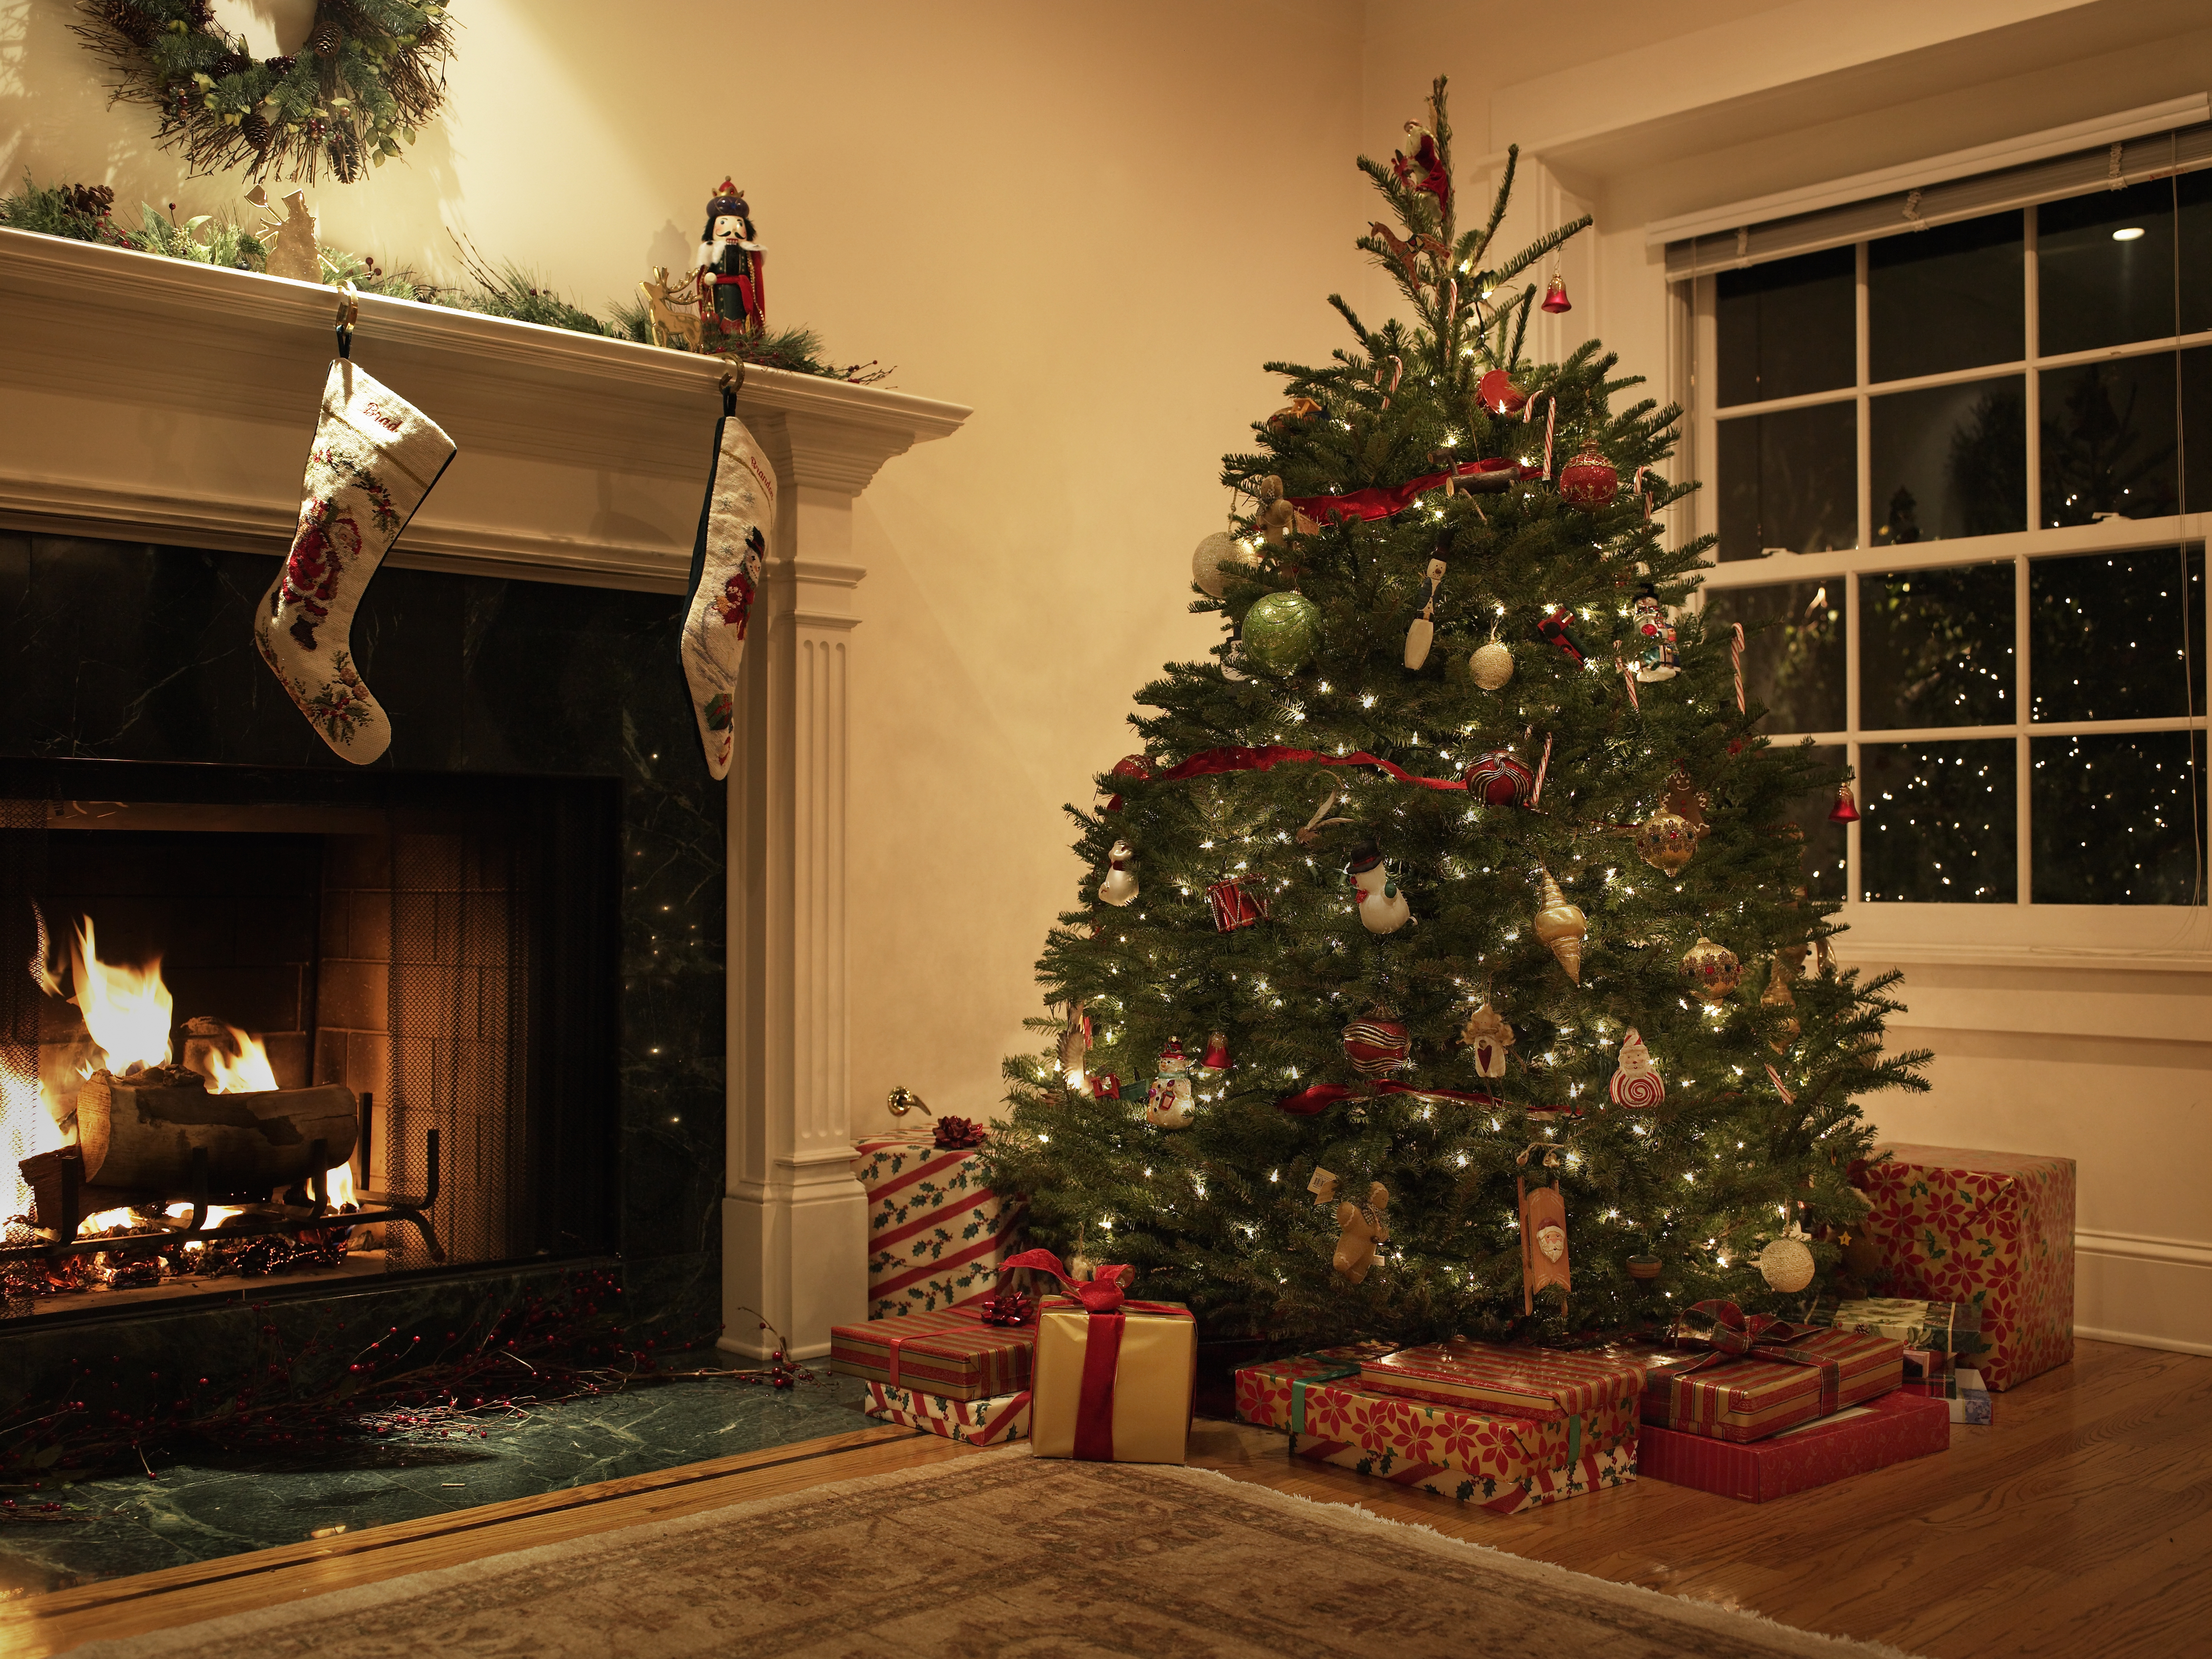 A living room decorated with a Christmas tree and stockings on the fireplace | Source: Getty Images